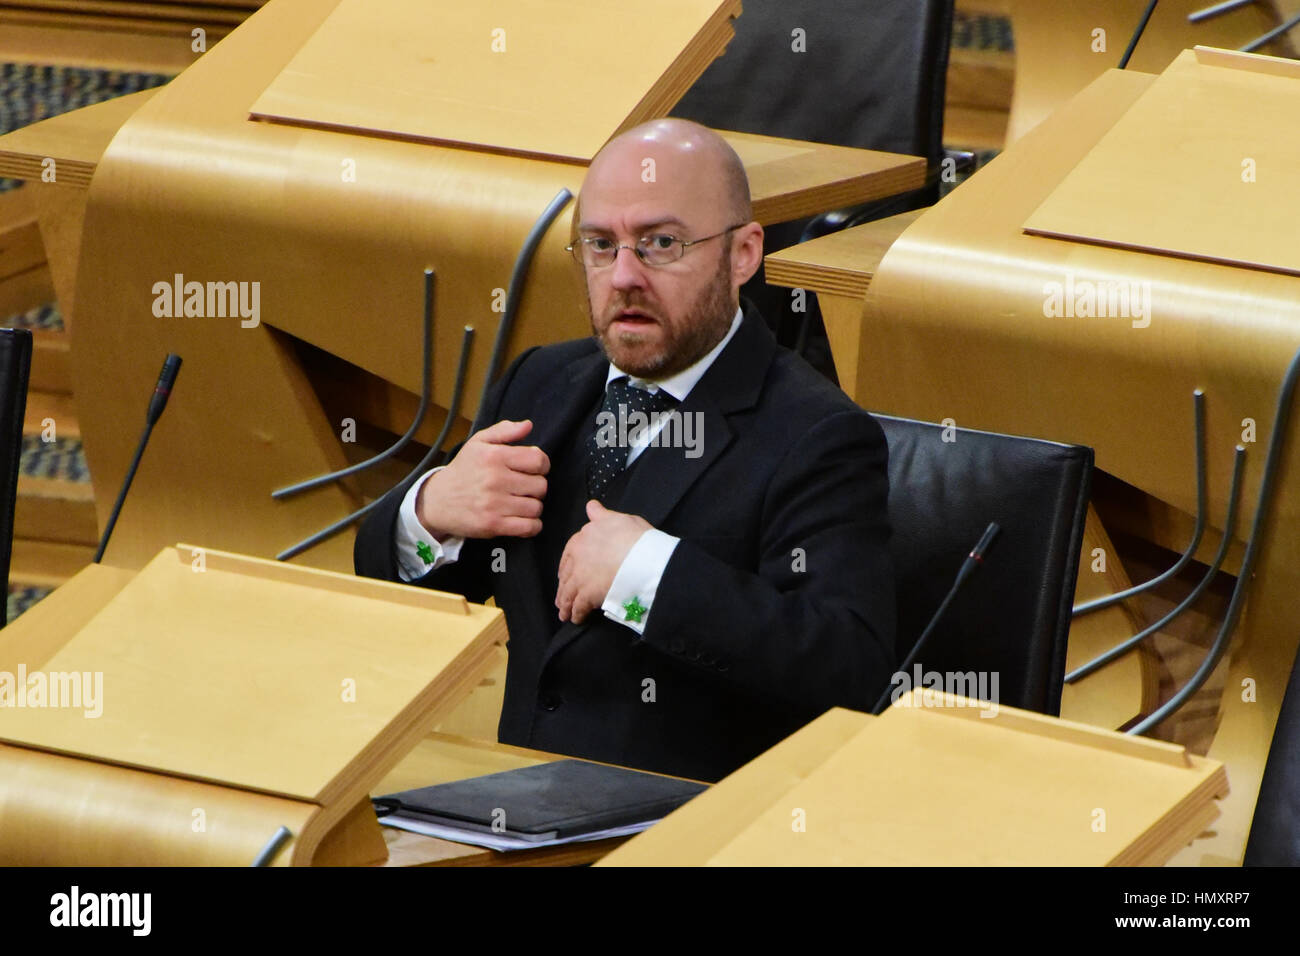 Edinburgh, UK. 7th Feb, 2017. Scottish Green Party Co-convener Patrick Harvie in the chamber of the Scottish Parliament for the debate on the triggering of Article 50 in the Brexit process, Credit: Ken Jack/Alamy Live News Stock Photo